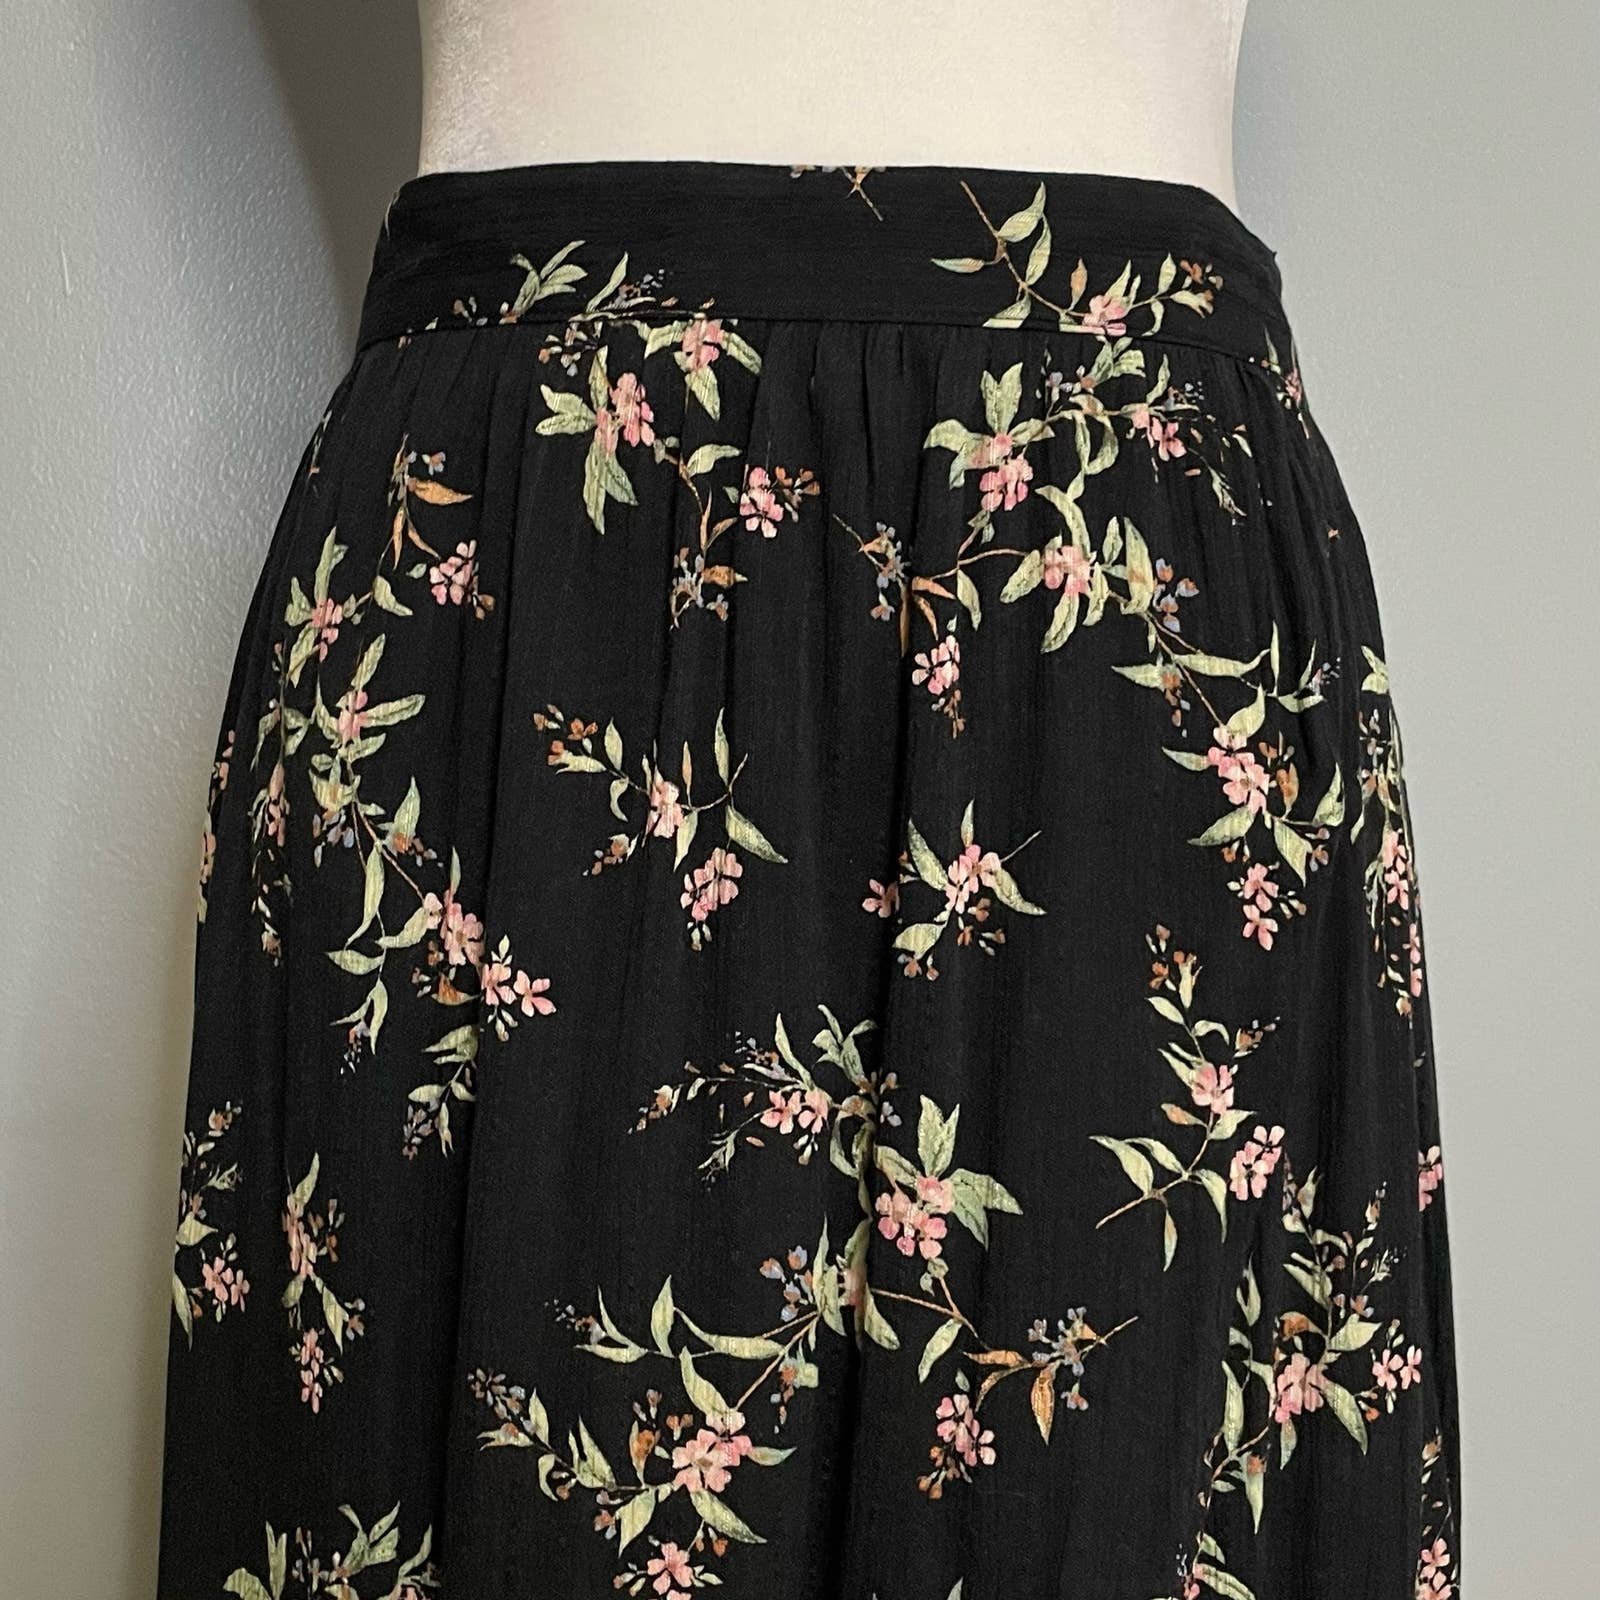 Authentic American Eagle Black Floral High Low Faux Wrap Skirt NEW Oo4lOyQzV Outlet Store